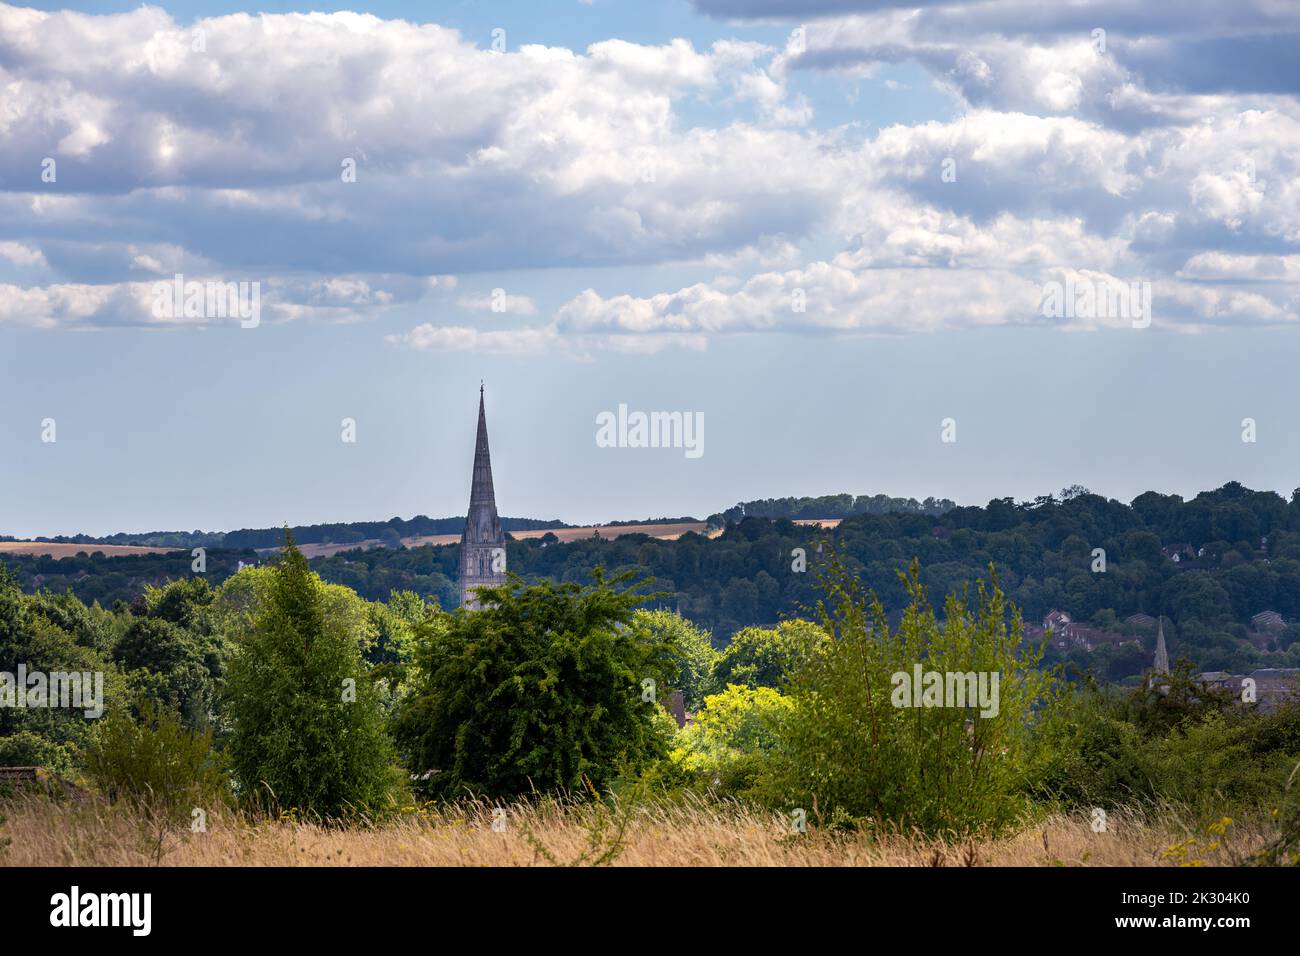 View of the spire ofSalisbury cathedral from Castle Hill Country Park, Wiltshire, England Stock Photo